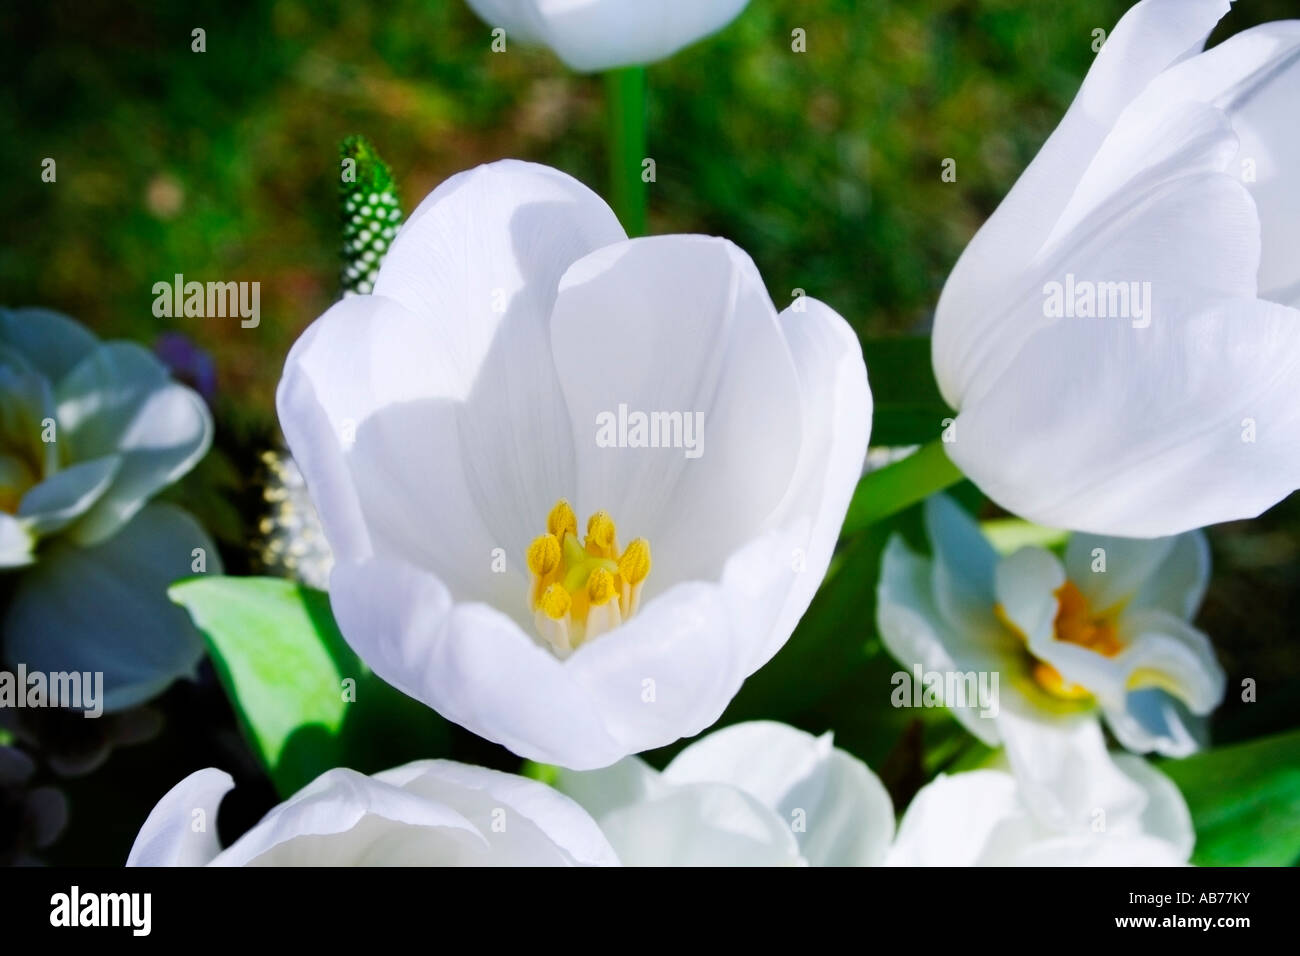 Tulipes blanches cose up Banque D'Images